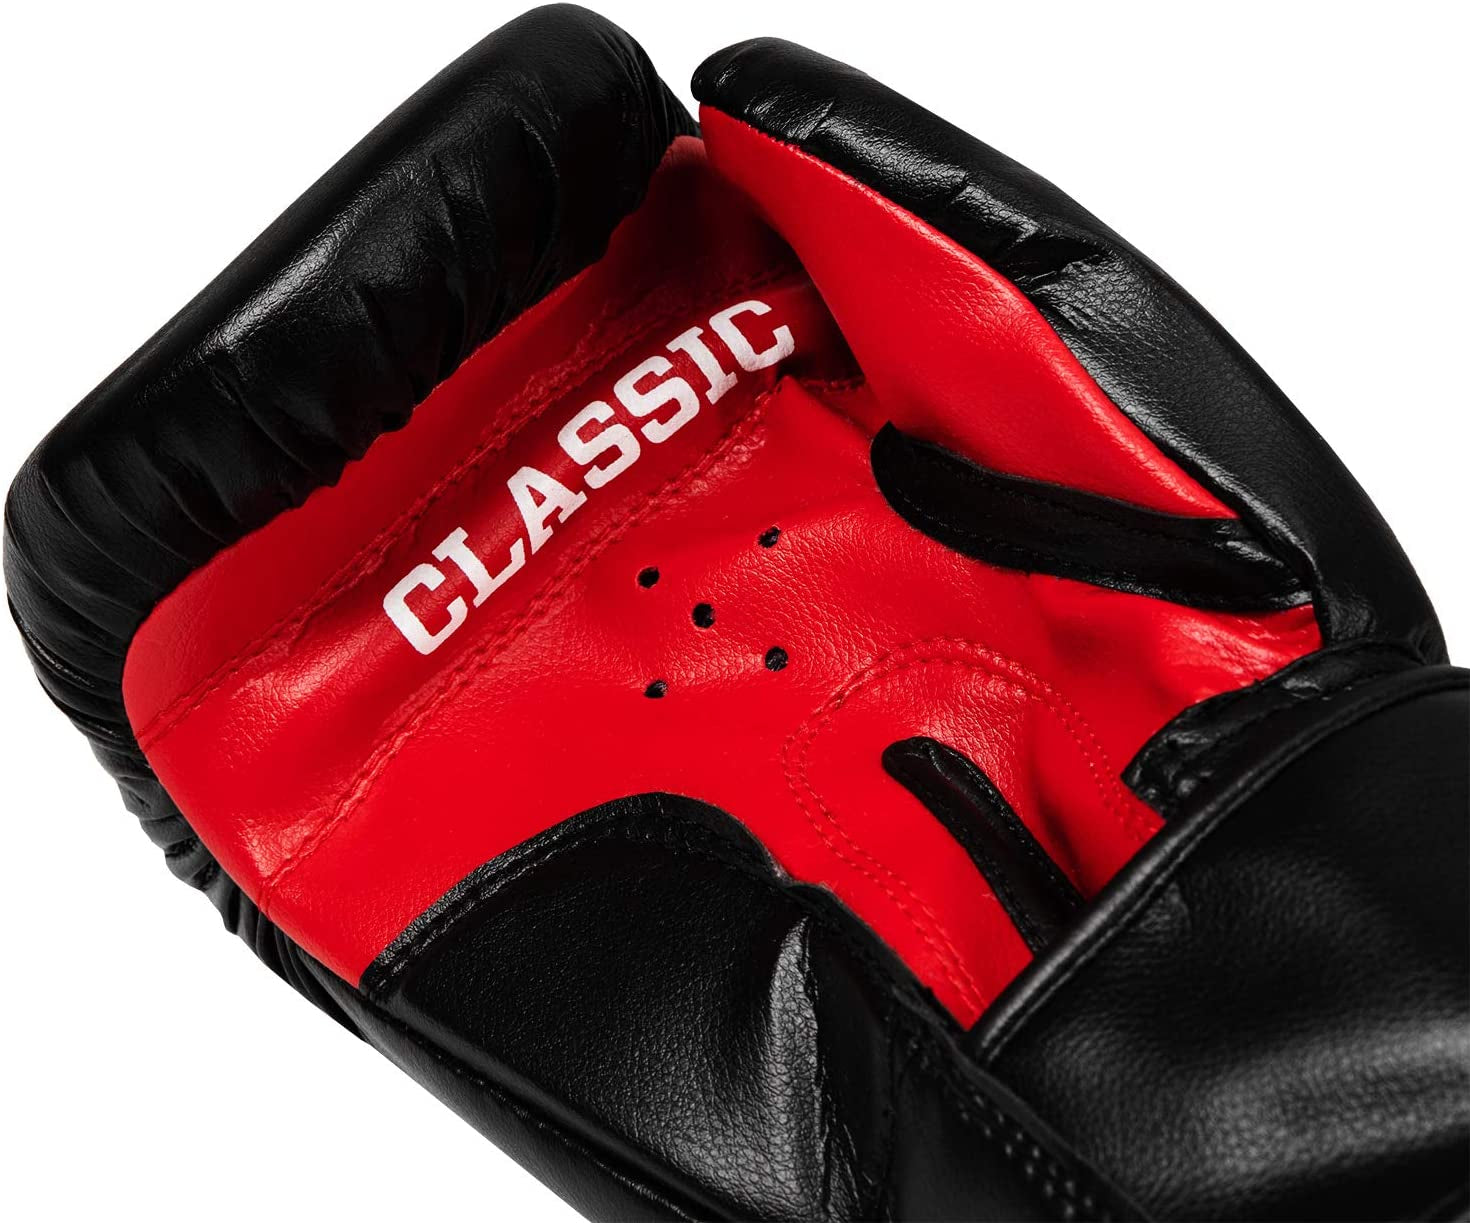 Title Classic Speed Boxing Gloves - Boxing Gloves, Punching Bag Gloves, Kickboxing Gloves, Punching Gloves, Heavy Bag Gloves, Boxing Gloves Men, Boxing Gloves Women, Boxing Equipment